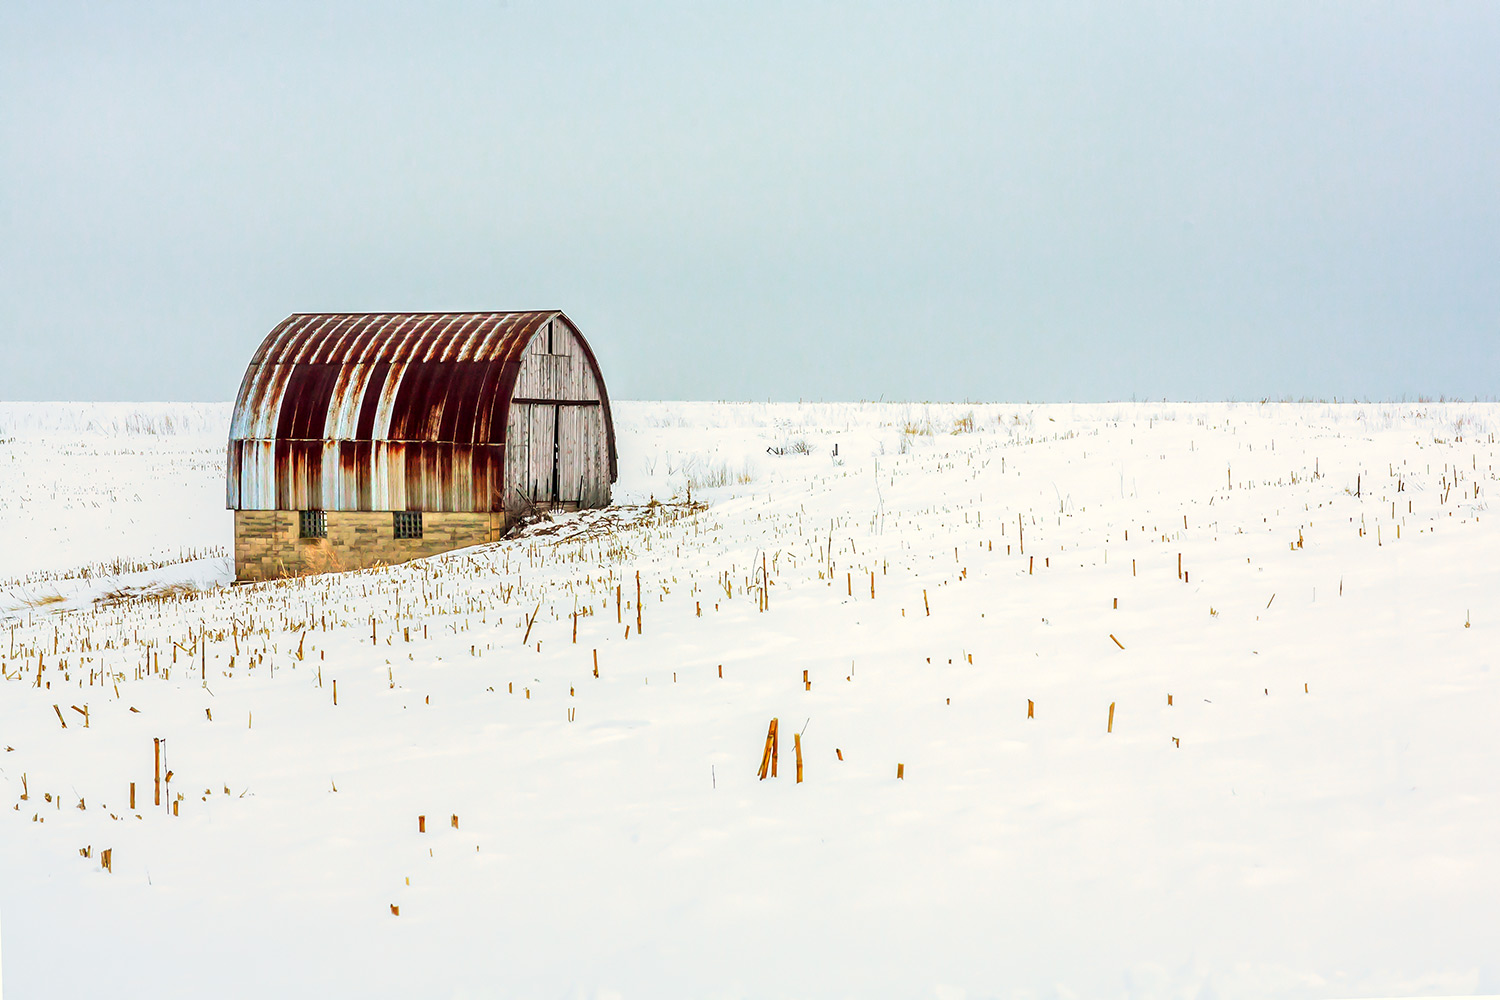 An old barn with a red, rusty roof stands alone and abandoned on a snowy landscape outside of Monroe, Wisconsin.&nbsp;→ Buy a Print